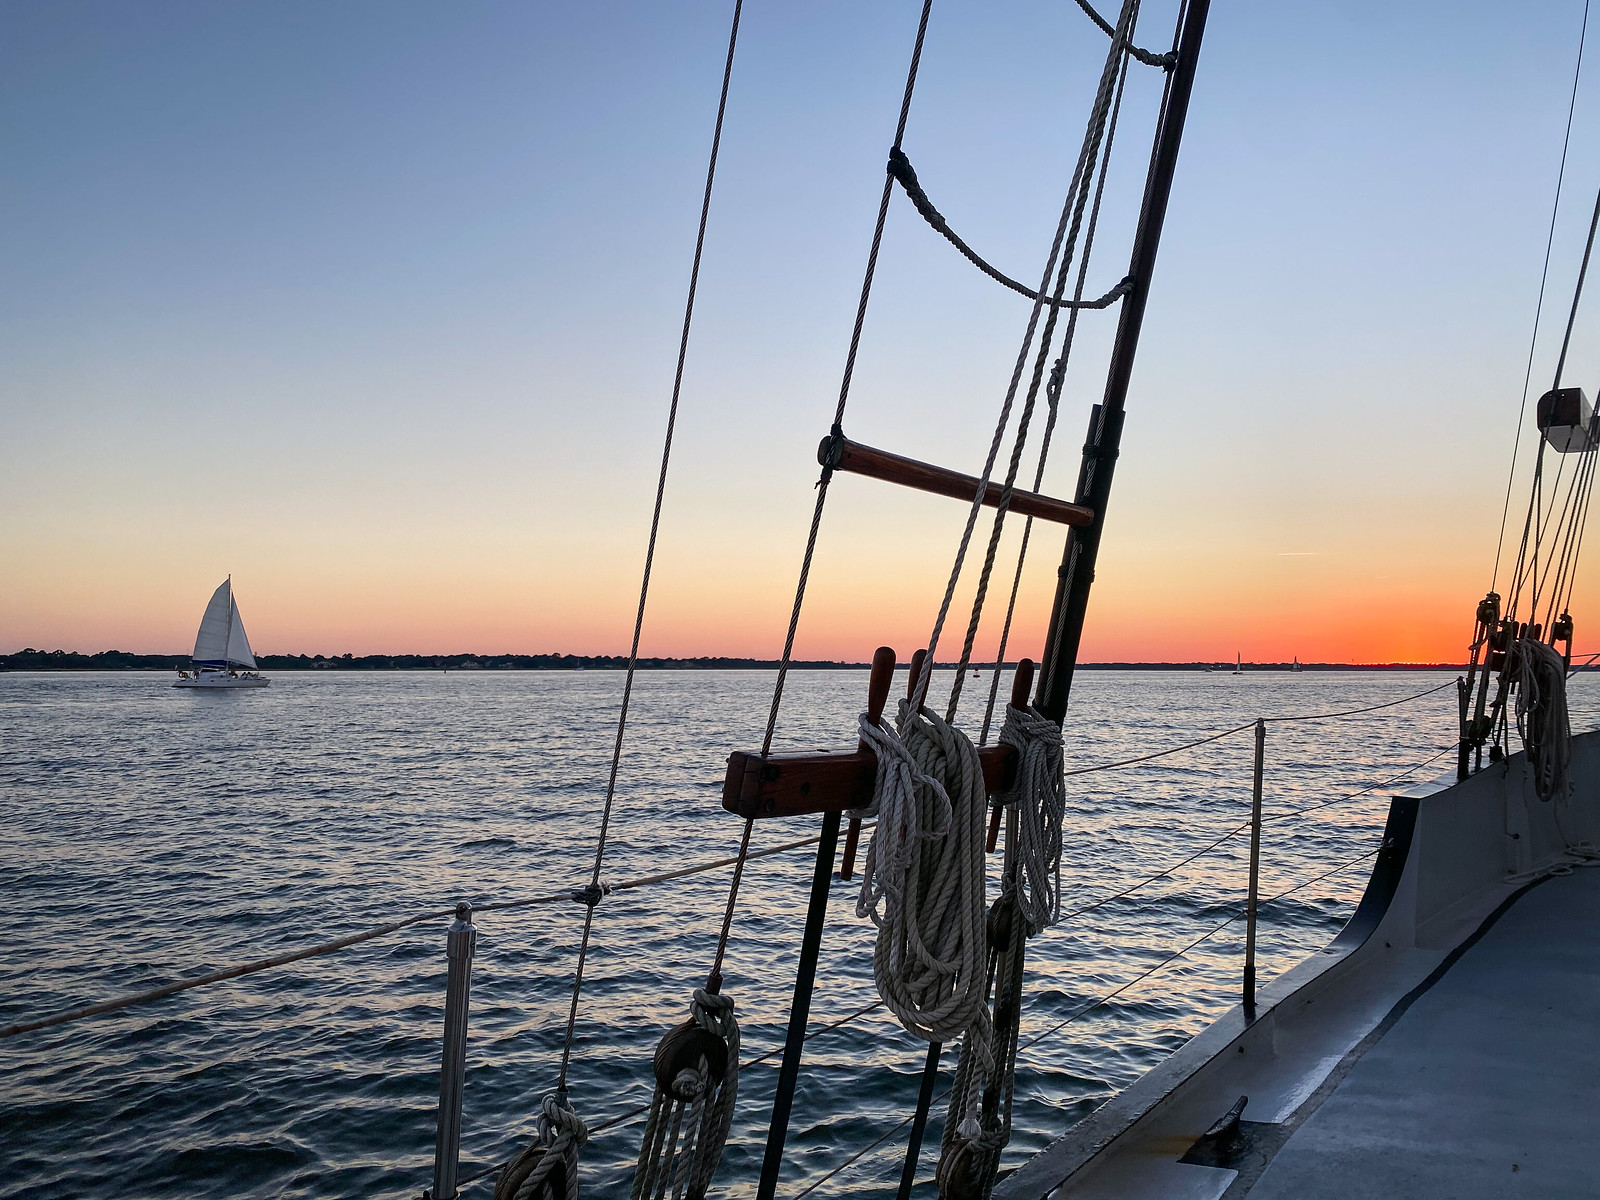 10 Things You Must Do in Charleston | Sunset Sail with Schooner Pride | What to Do in Charleston South Carolina | Charleston Travel Guide | Top Things to do in Charleston | Best Things to Do in Charleston SC | What to See, Do & Eat in Charleston